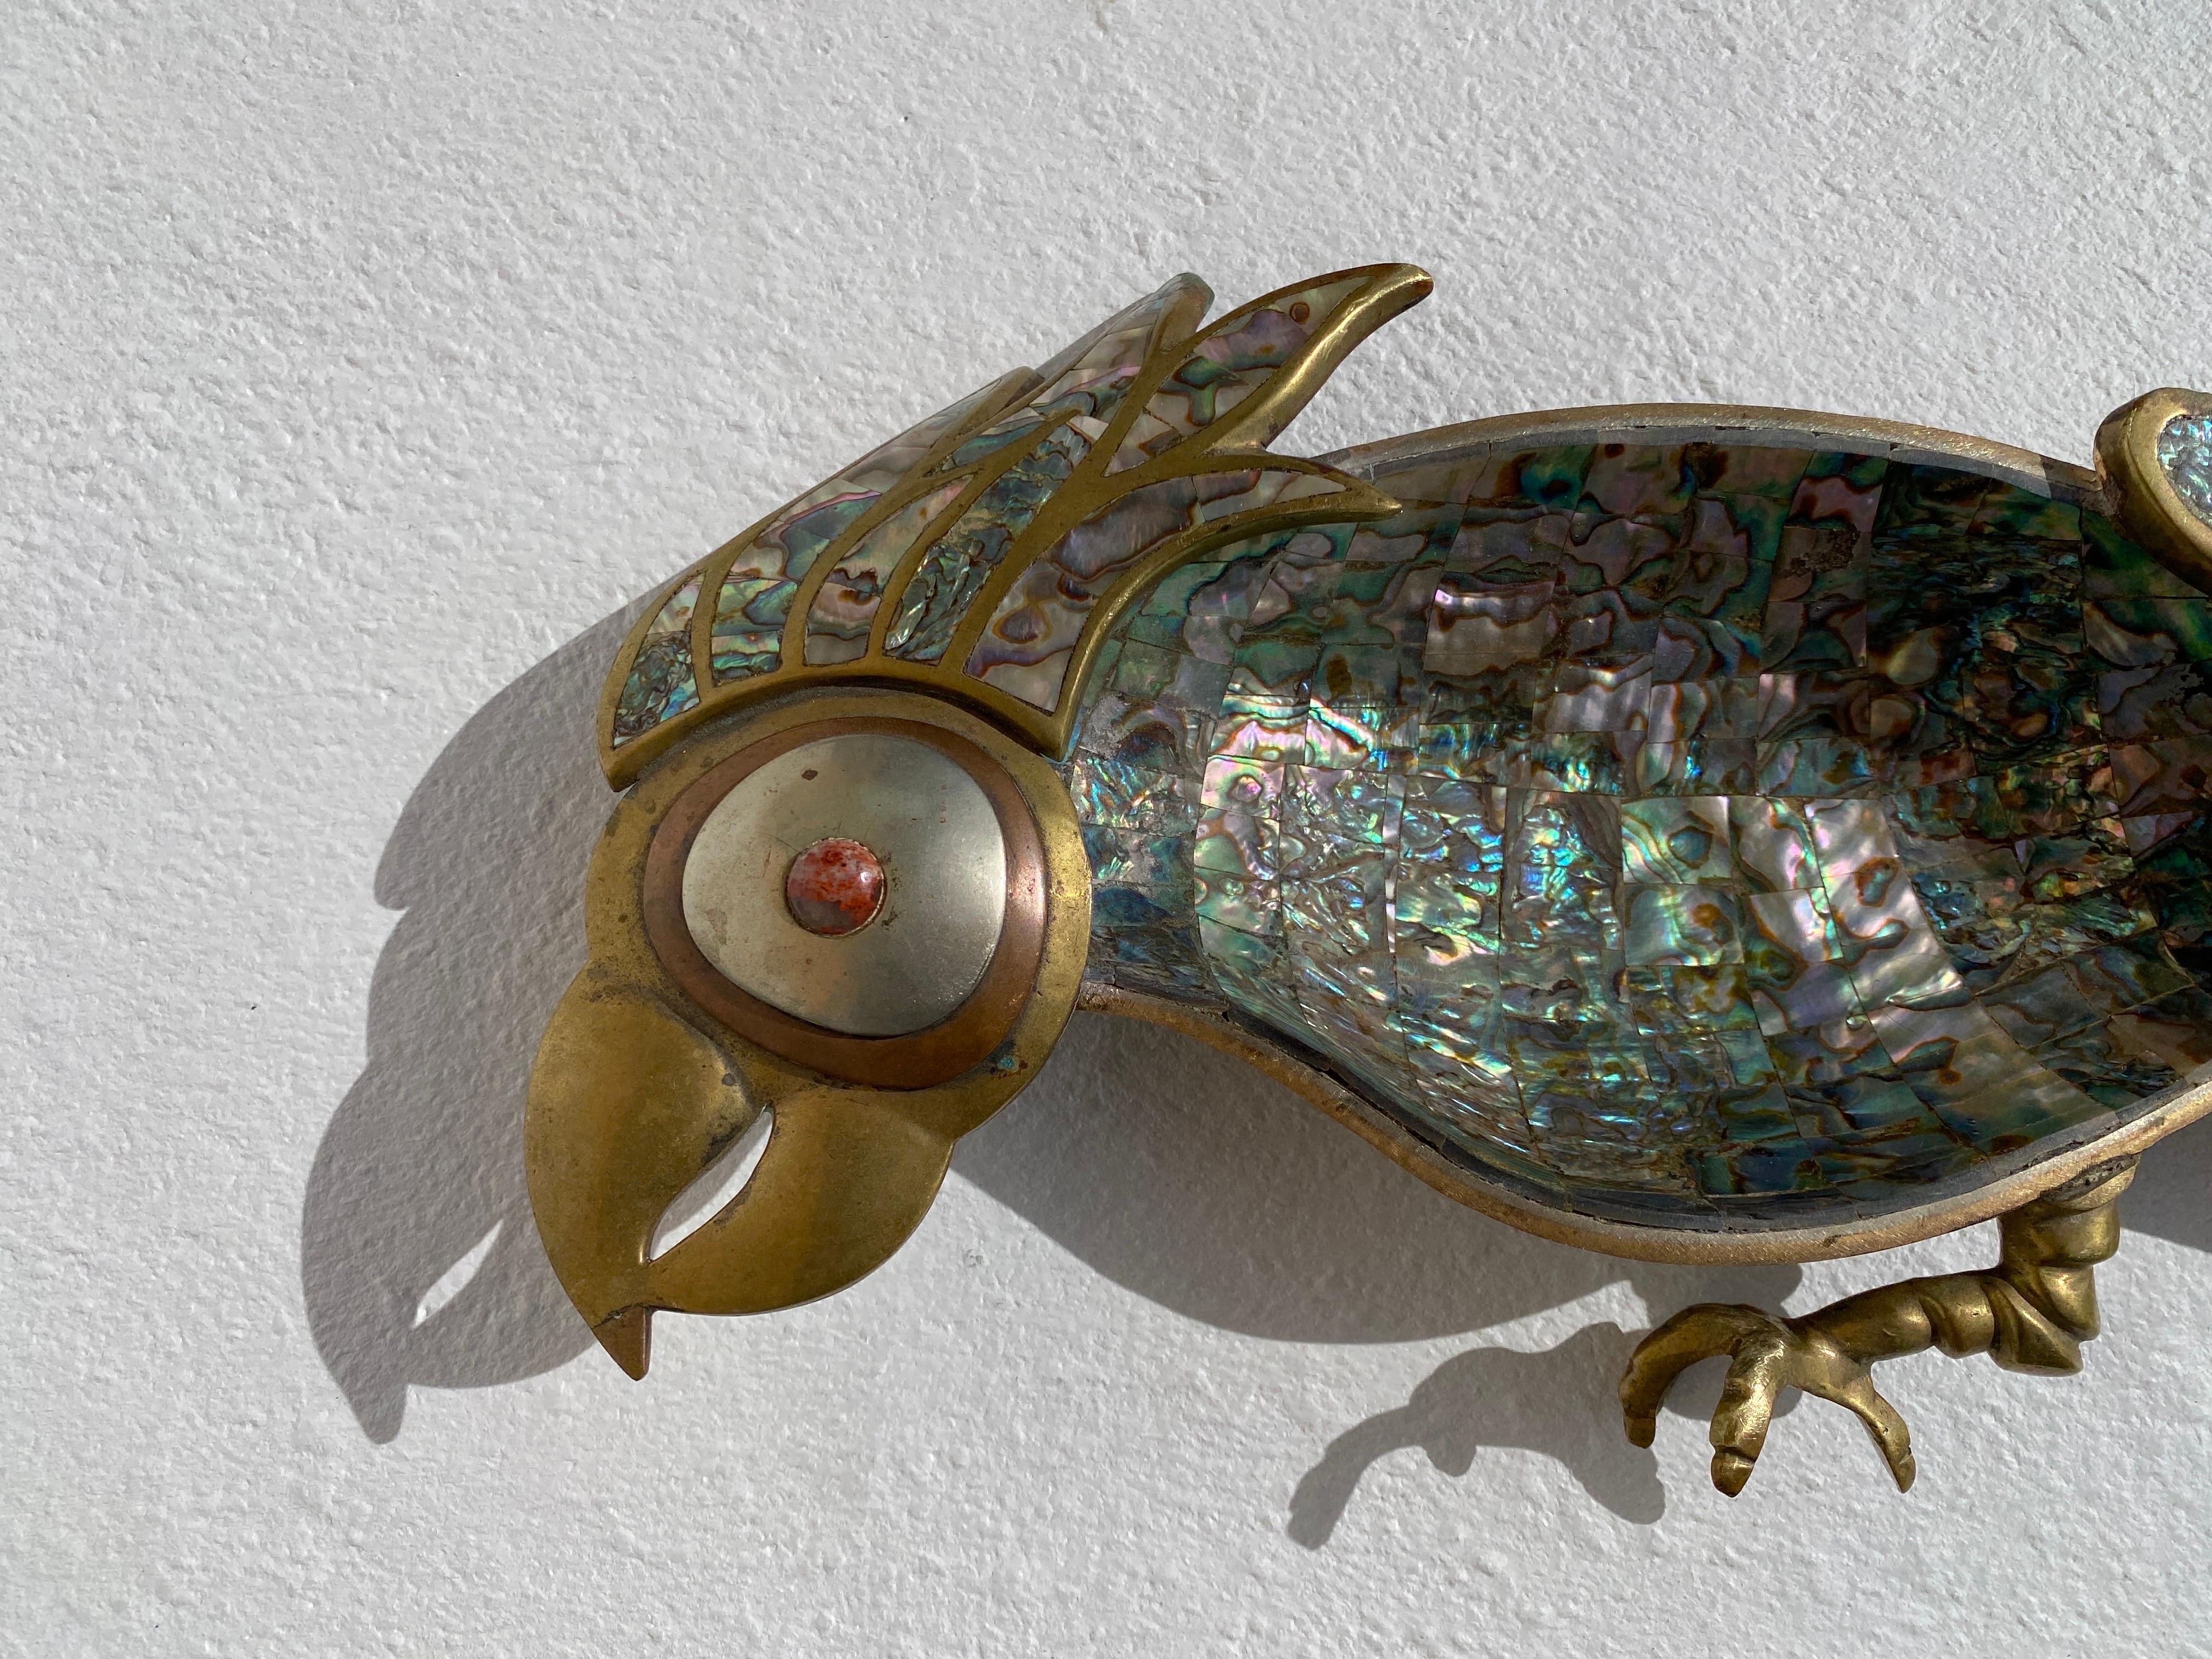 Pair of Mexican brass and abalone shell decorative parrot sculptures attributed to Los Castillo / Emilia Castillo.
Large parrot is 30” long, 9” wide and 3.5” high. Feathers are covered in abalone shell and inside is finished with 22K gold leaf.